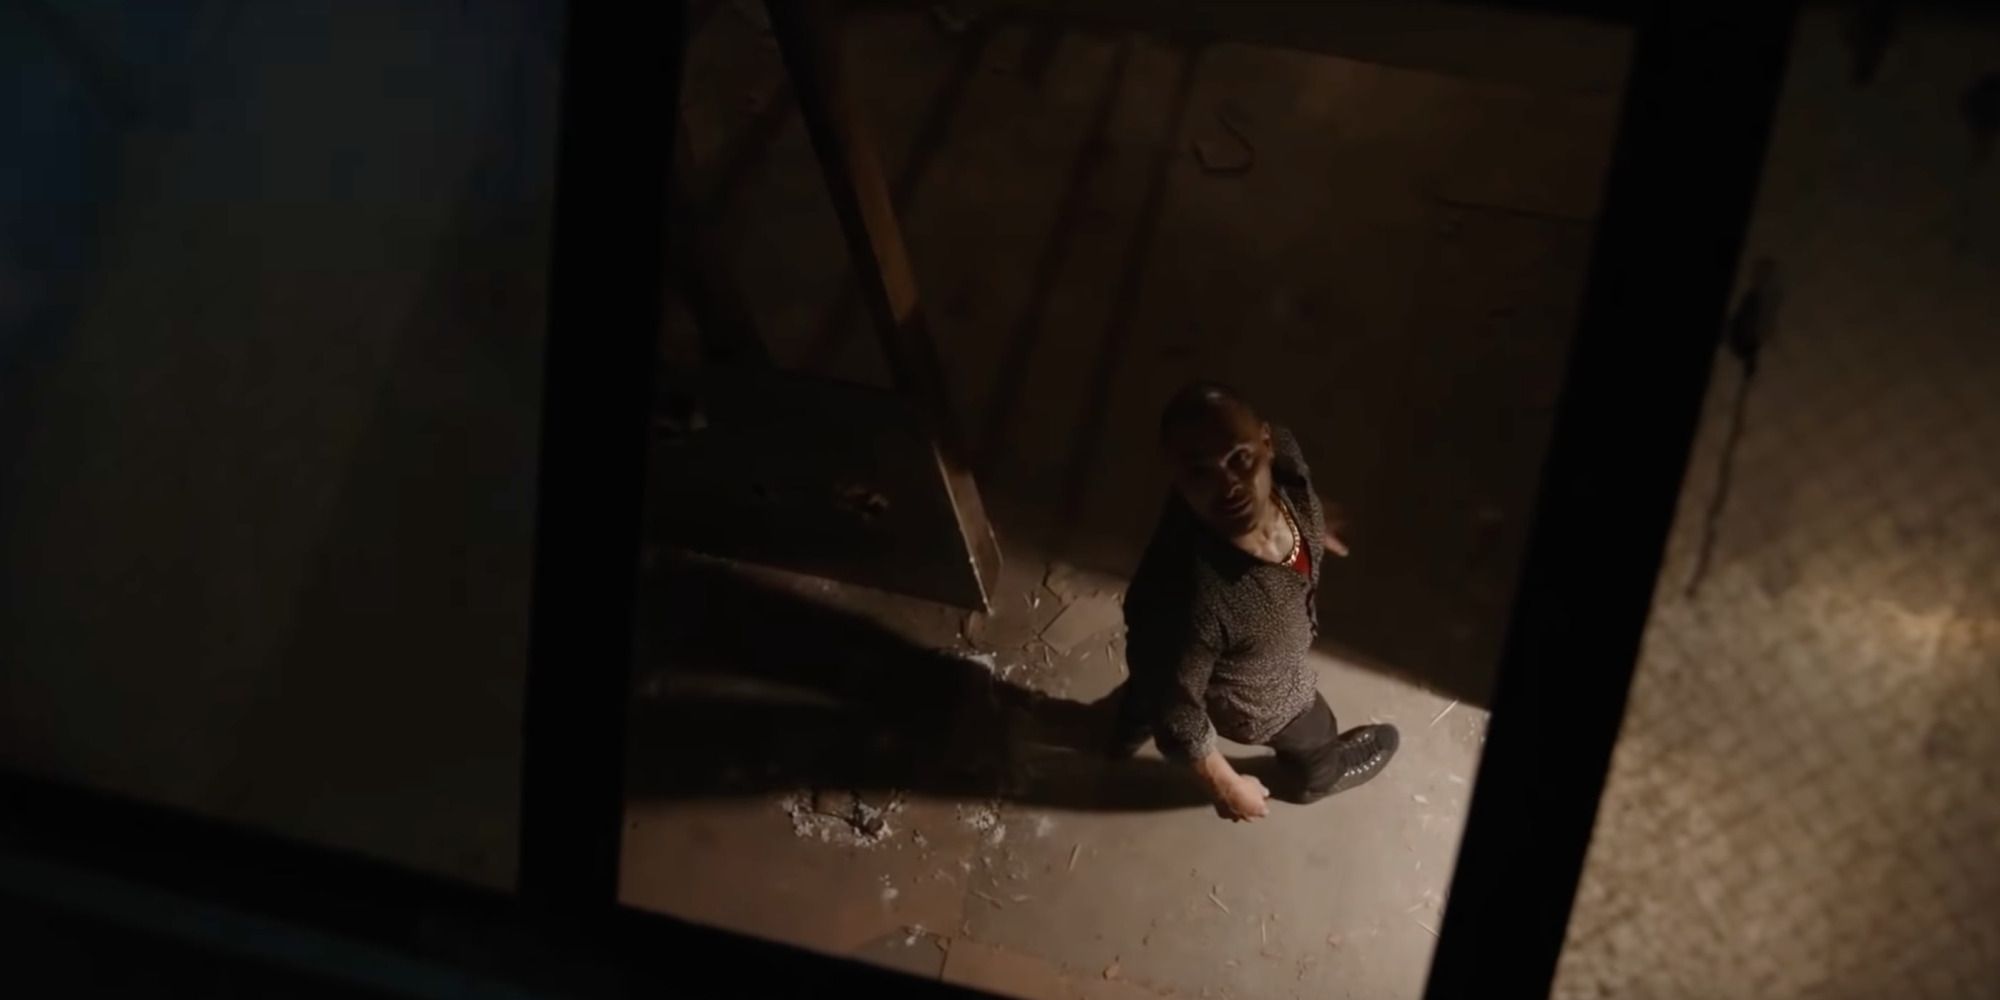 Nacho from "Better Call Saul", looking at the sky through the open ceiling